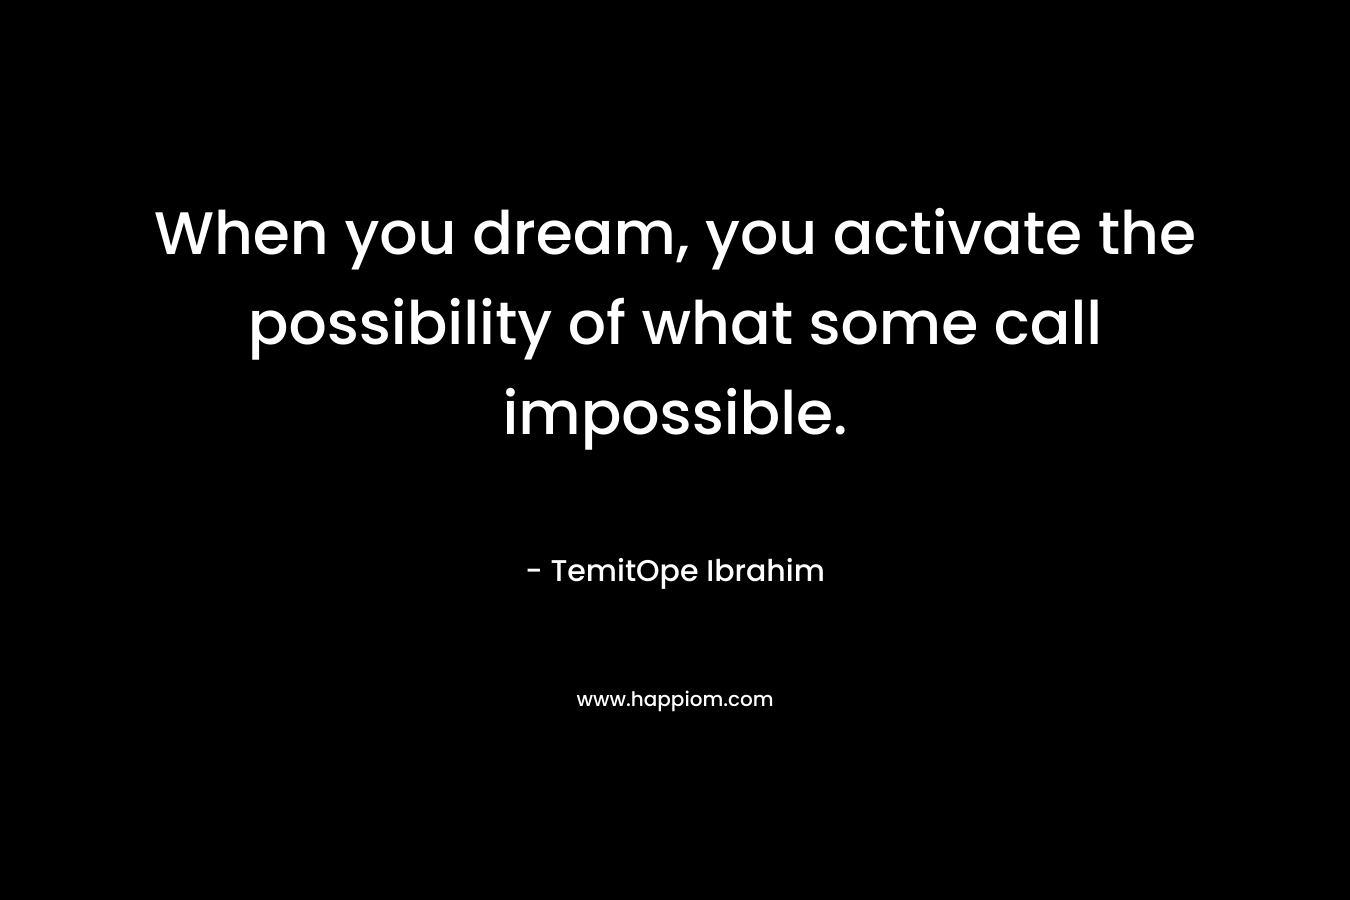 When you dream, you activate the possibility of what some call impossible. – TemitOpe Ibrahim